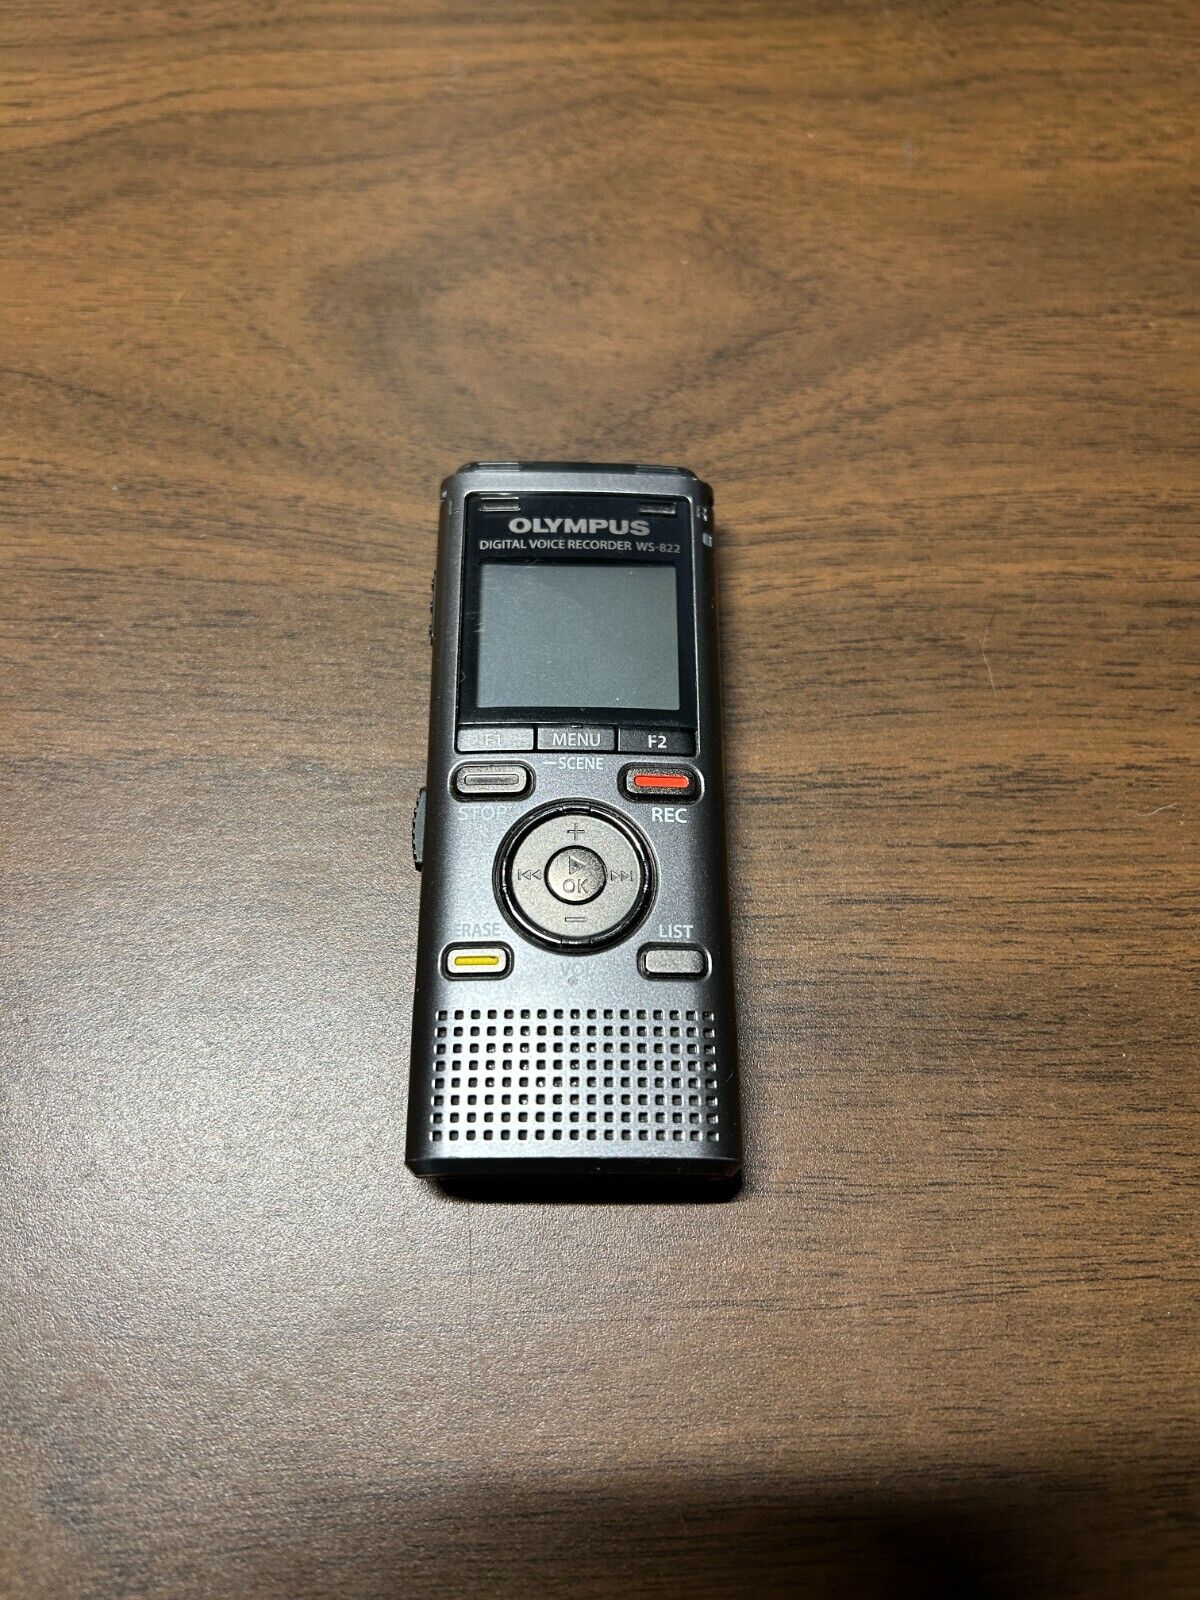 Olympus WS-822 Digital Voice Recorder MP3 Player 4GB Memory $5.00 US SHIPPING